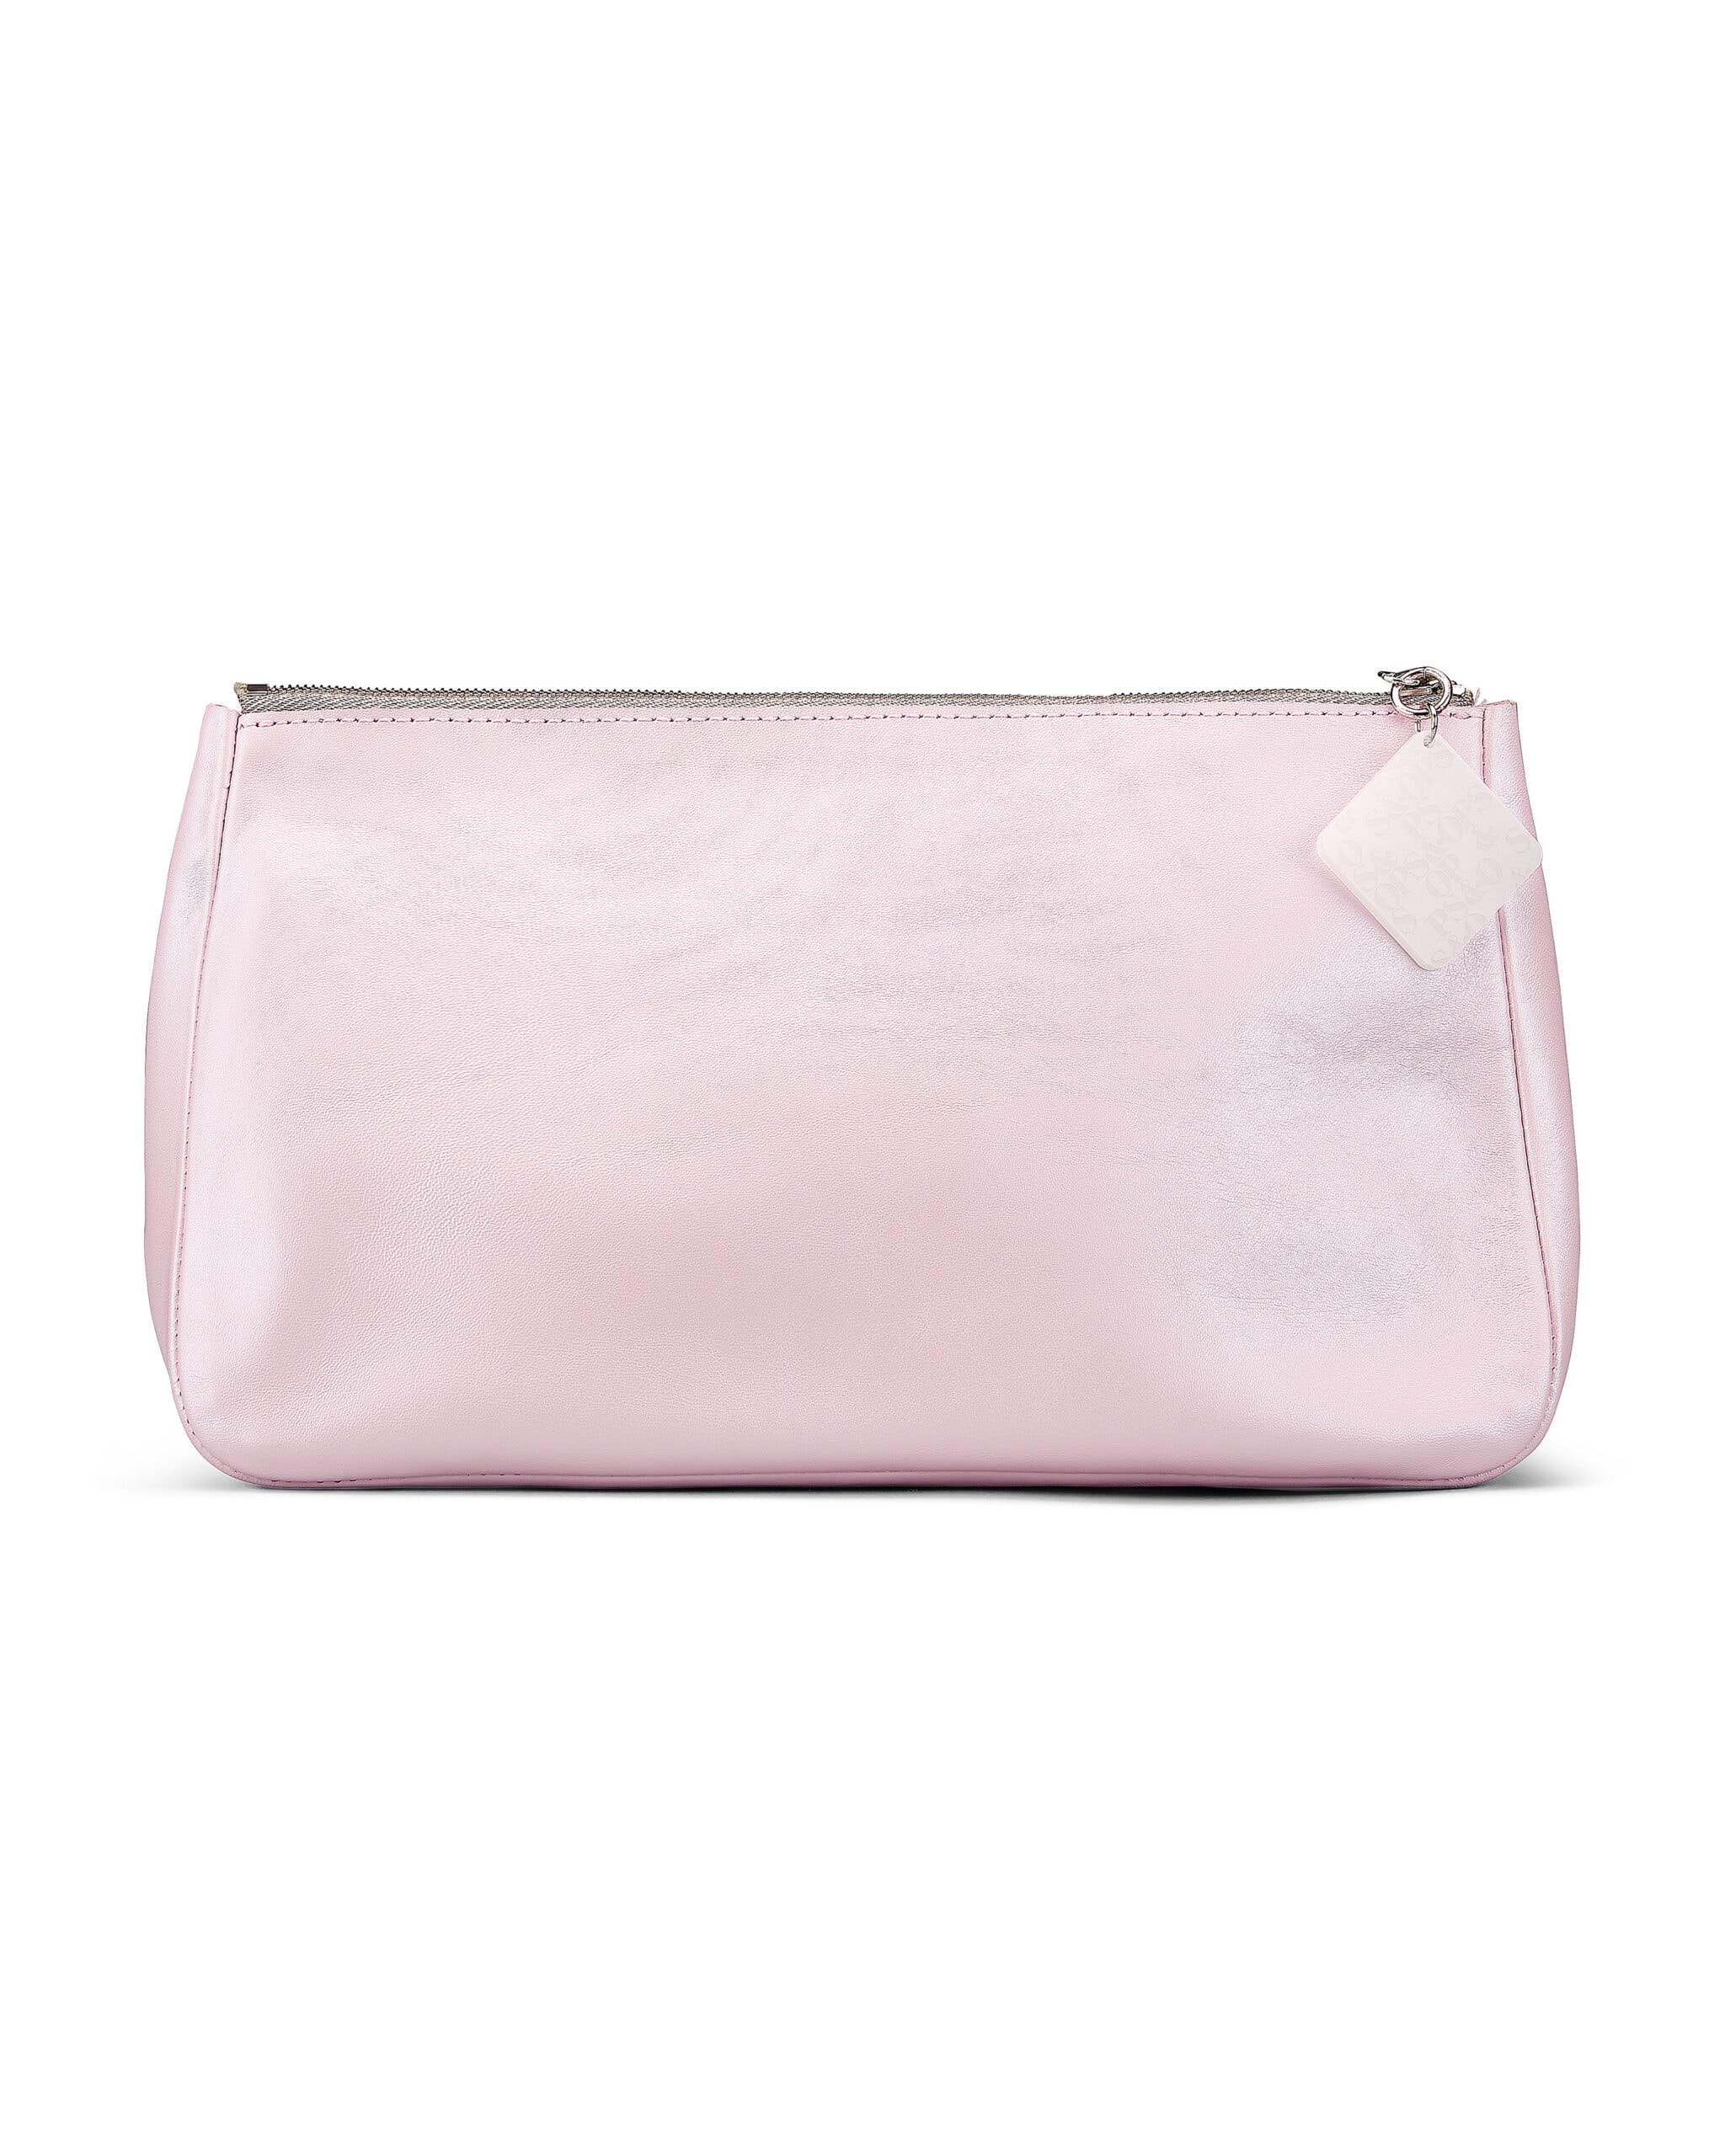 Ops&Ops No101 Pink Frost pearlised leather clutch with Tatty Devine made white on pink zip pull